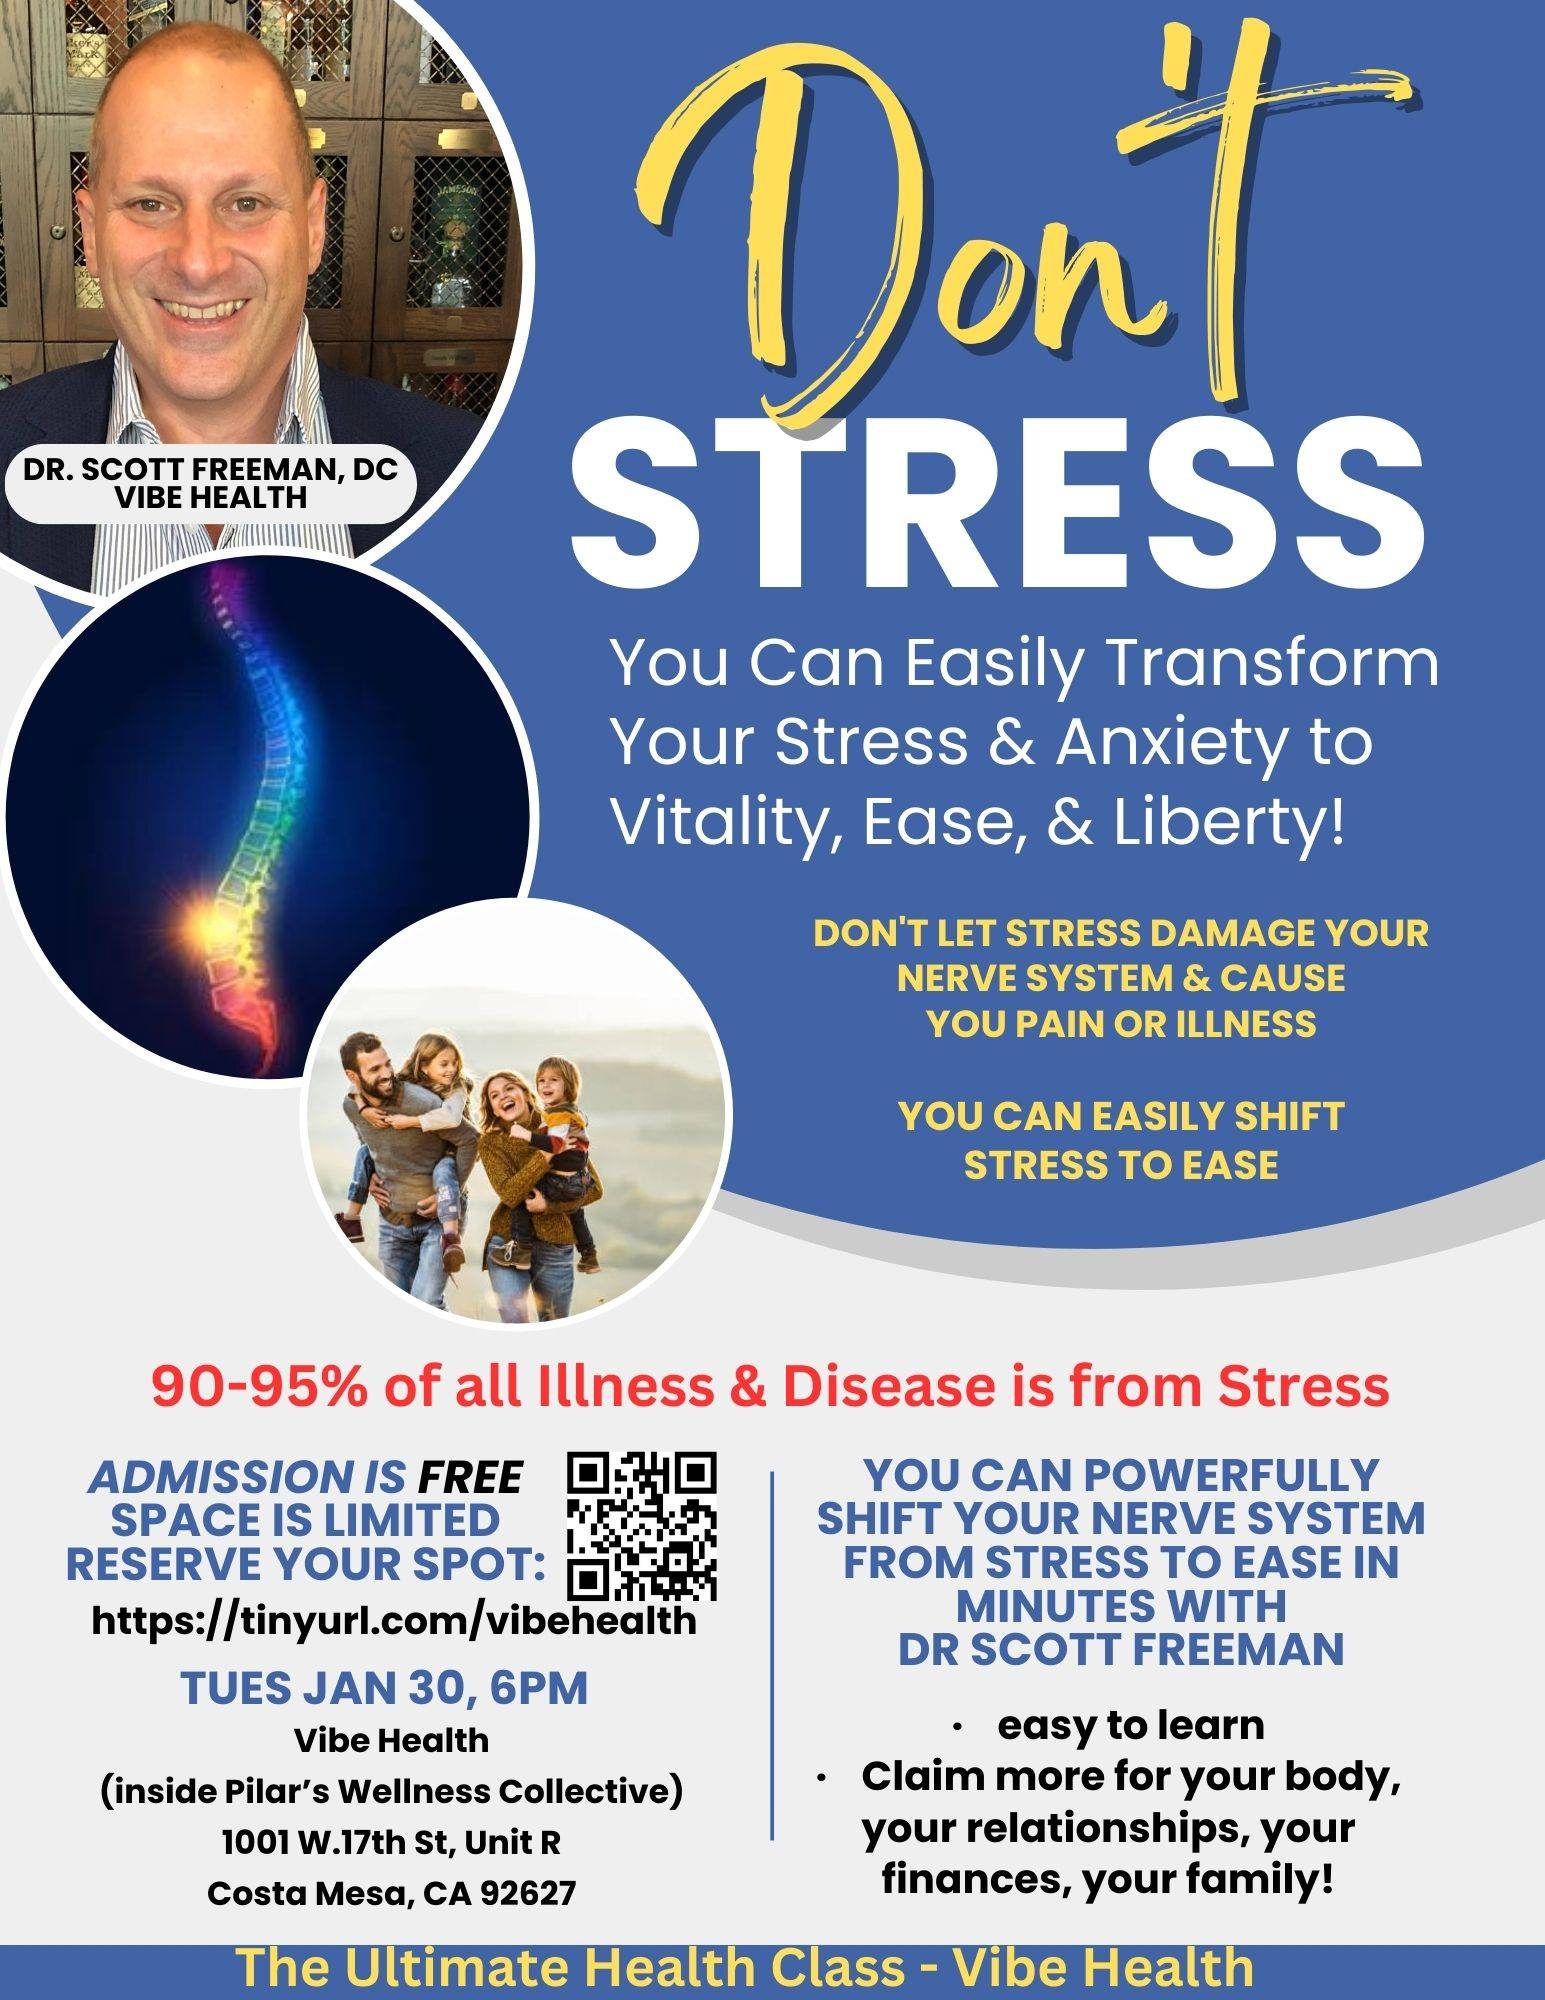 Don't Stress! Easily Transform your Stress and Anxiety to Vitality, Ease, & Liberty with Dr. Scott Freeman, DC Vibe Health